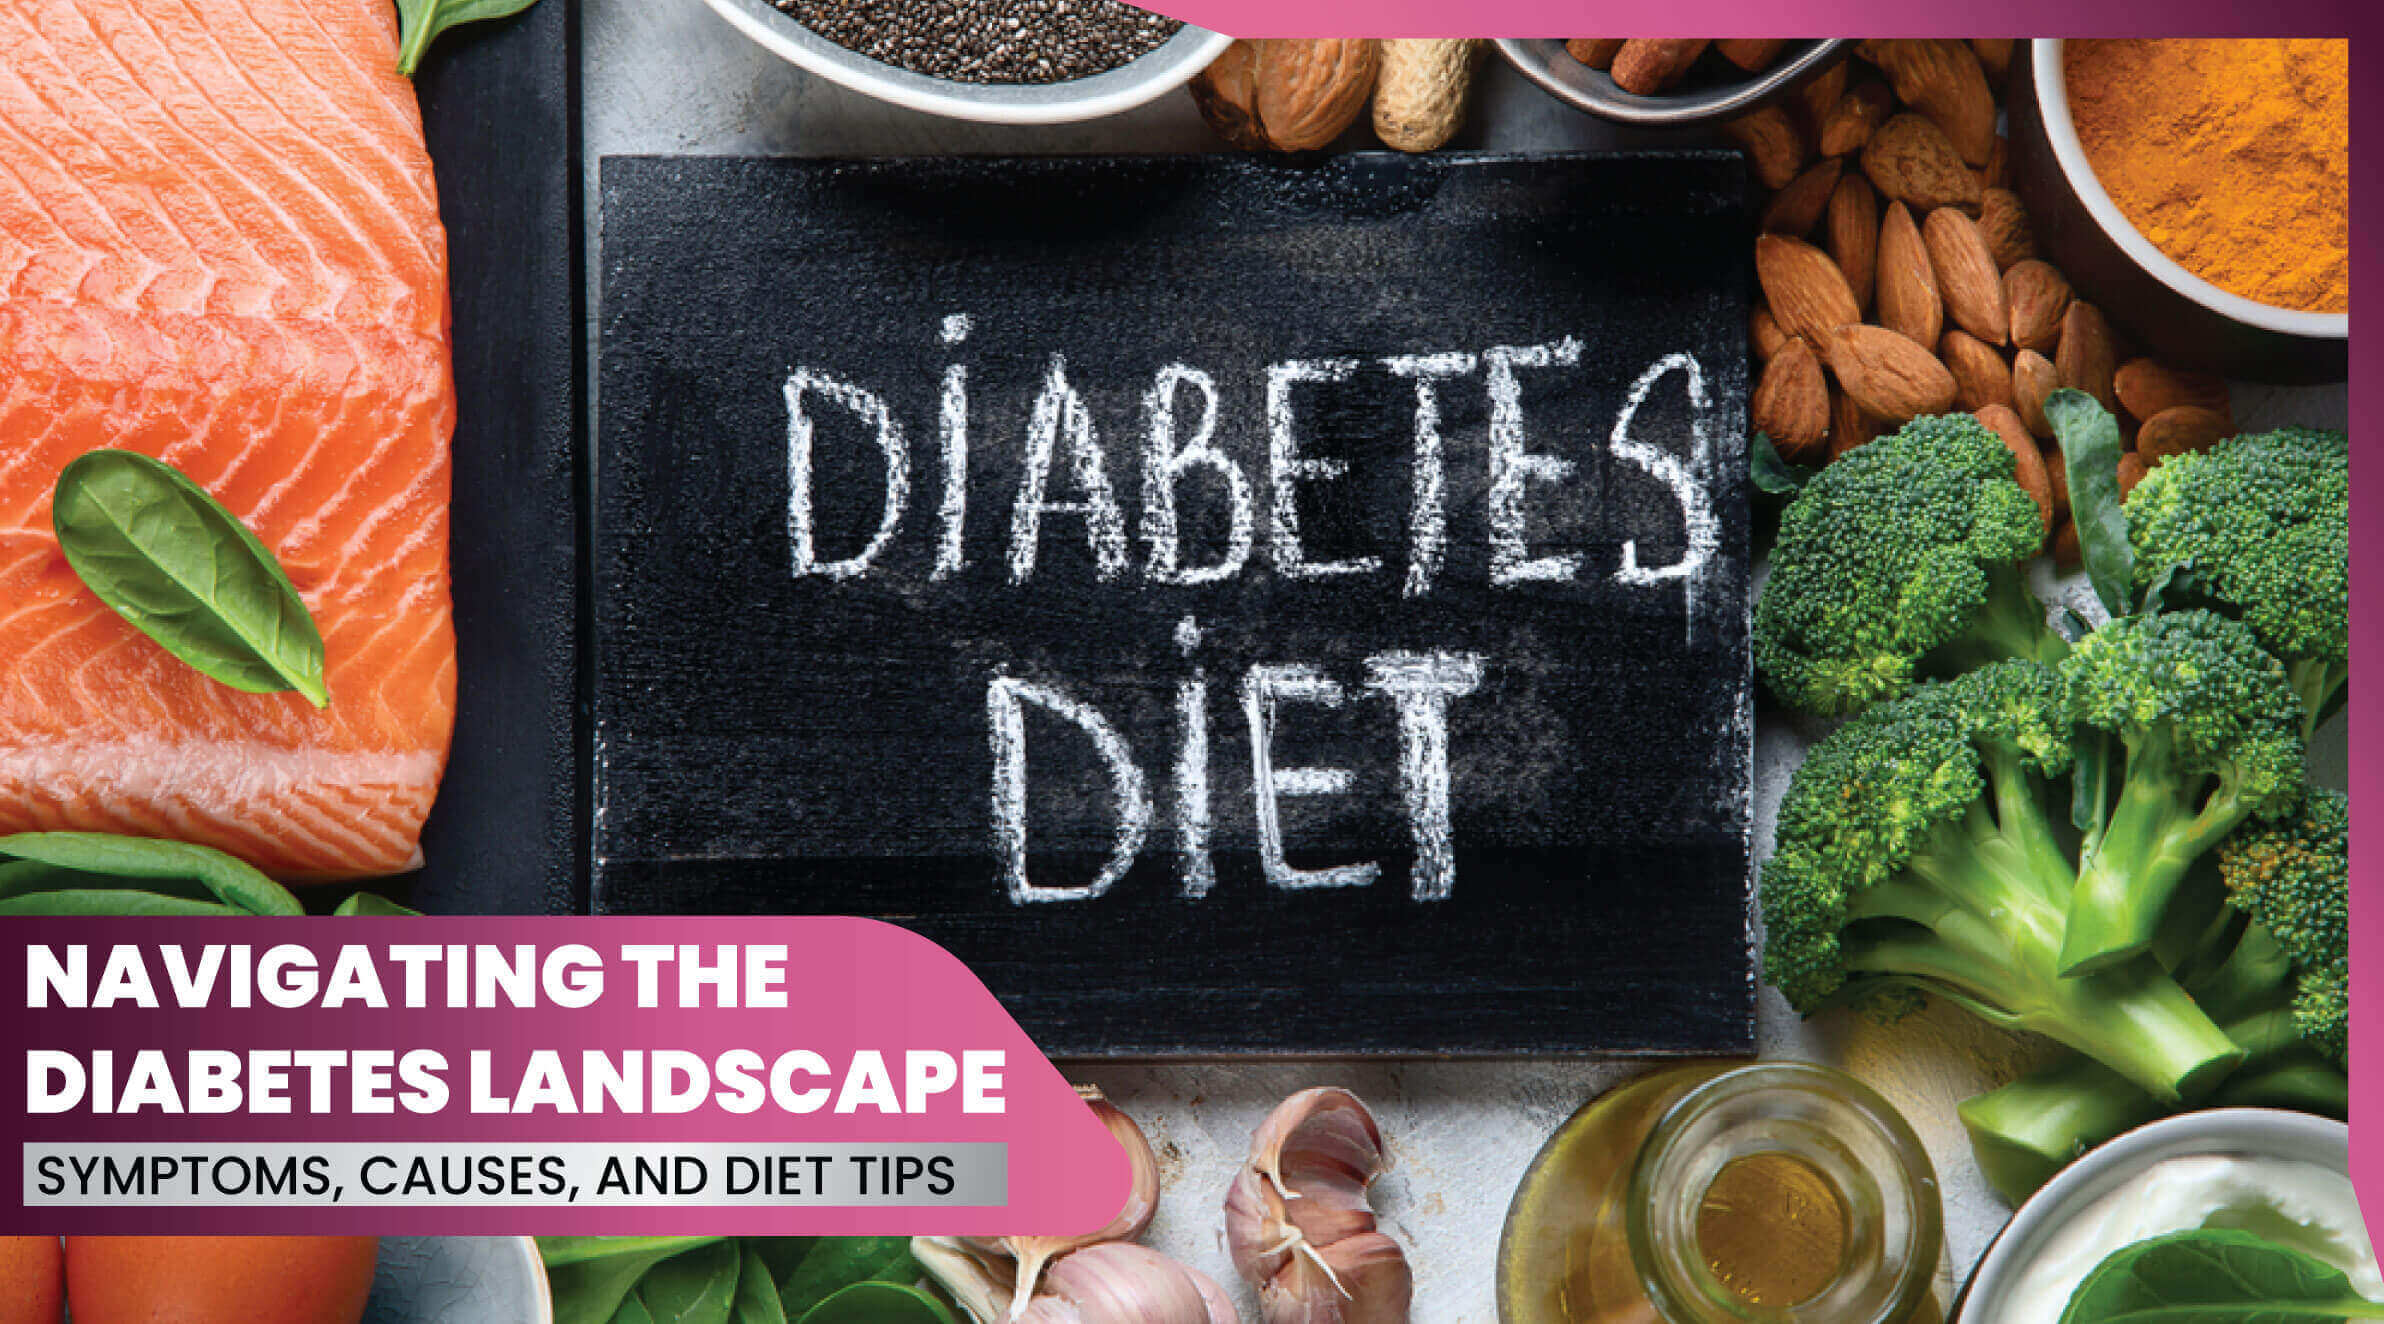 11Navigating the Diabetes Landscape: Symptoms, Causes, and Diet Tips